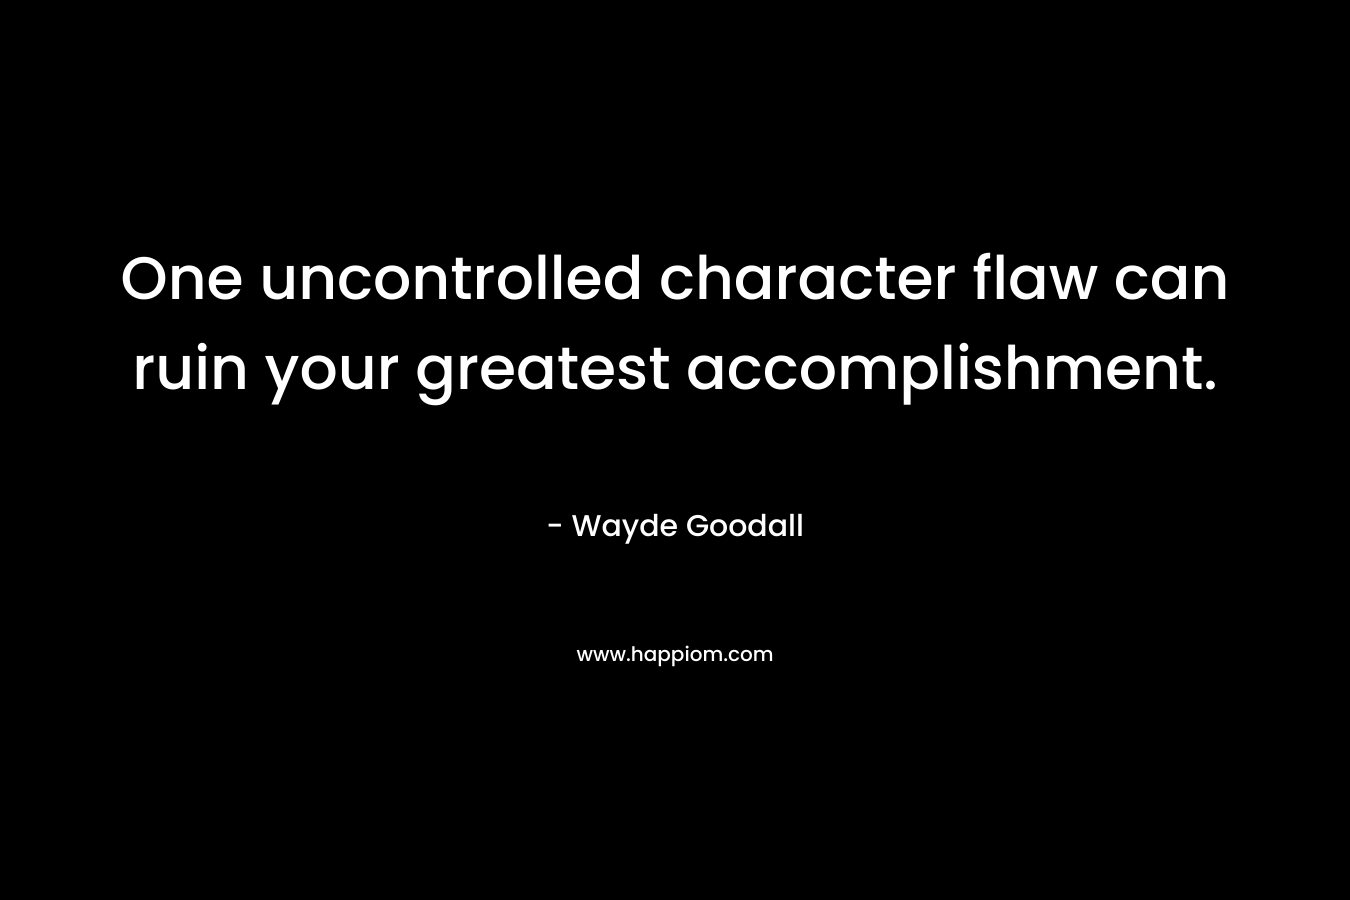 One uncontrolled character flaw can ruin your greatest accomplishment.